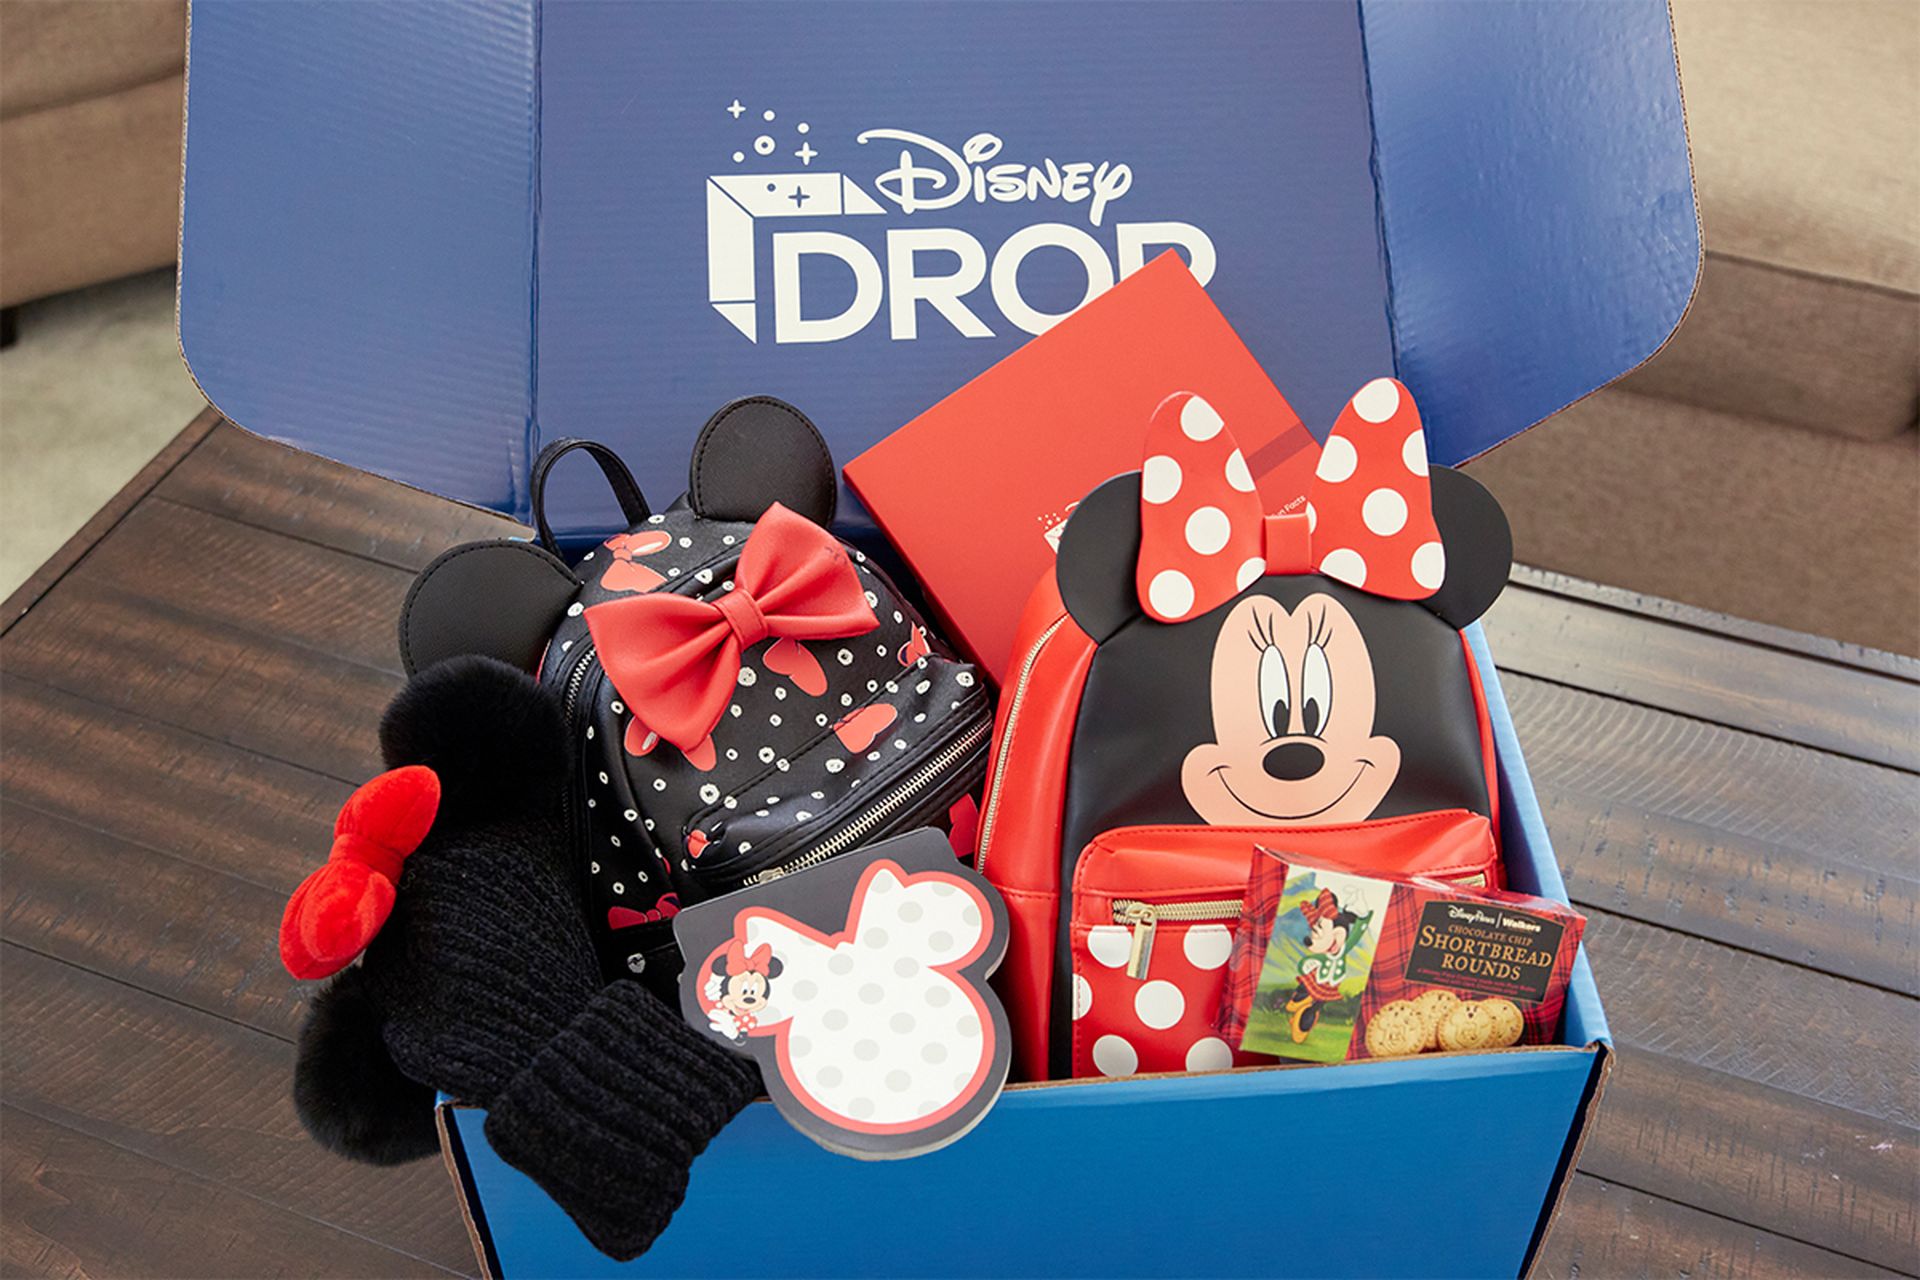 In this article, we are going to be covering how to get Disney Drop Box gift, which will be given to all subscribers of the streaming platform who renew their membership.